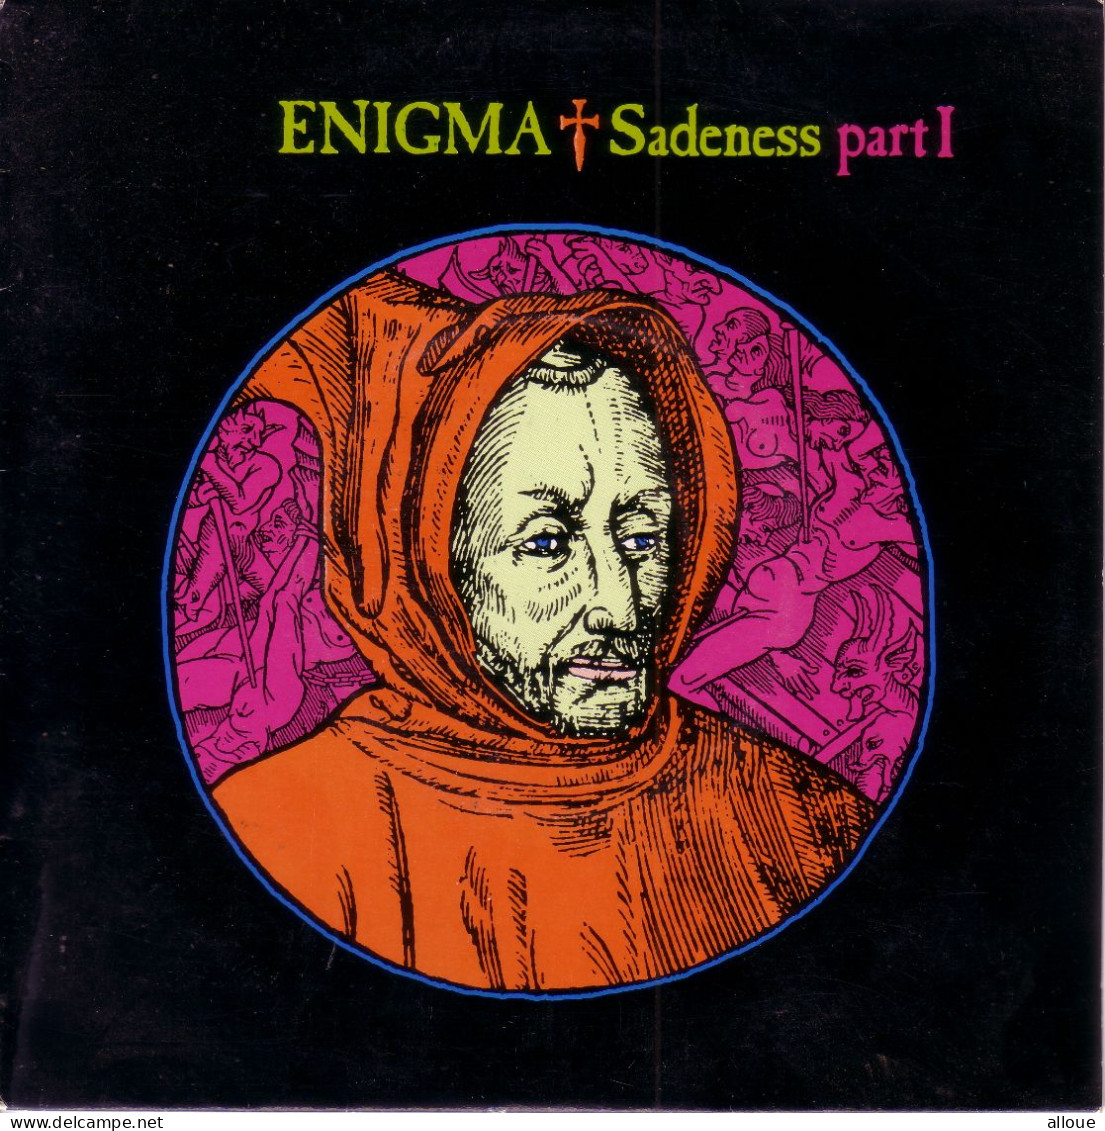 ENIGMA - FR SG - SADENESS PART 1 + - Other - English Music